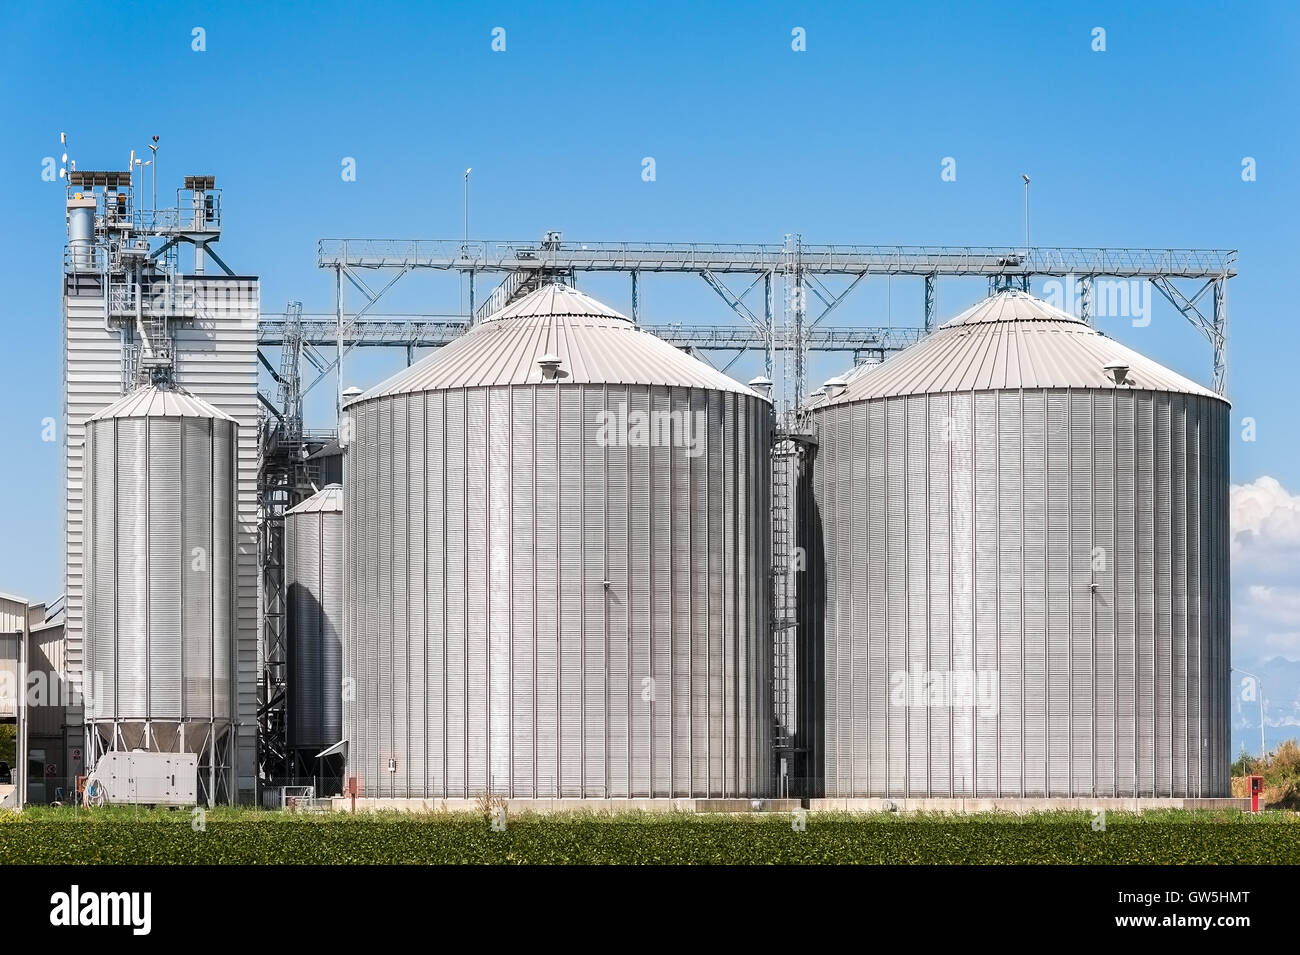 Agricultural Silo Building Exterior Storage And Drying Of Grains